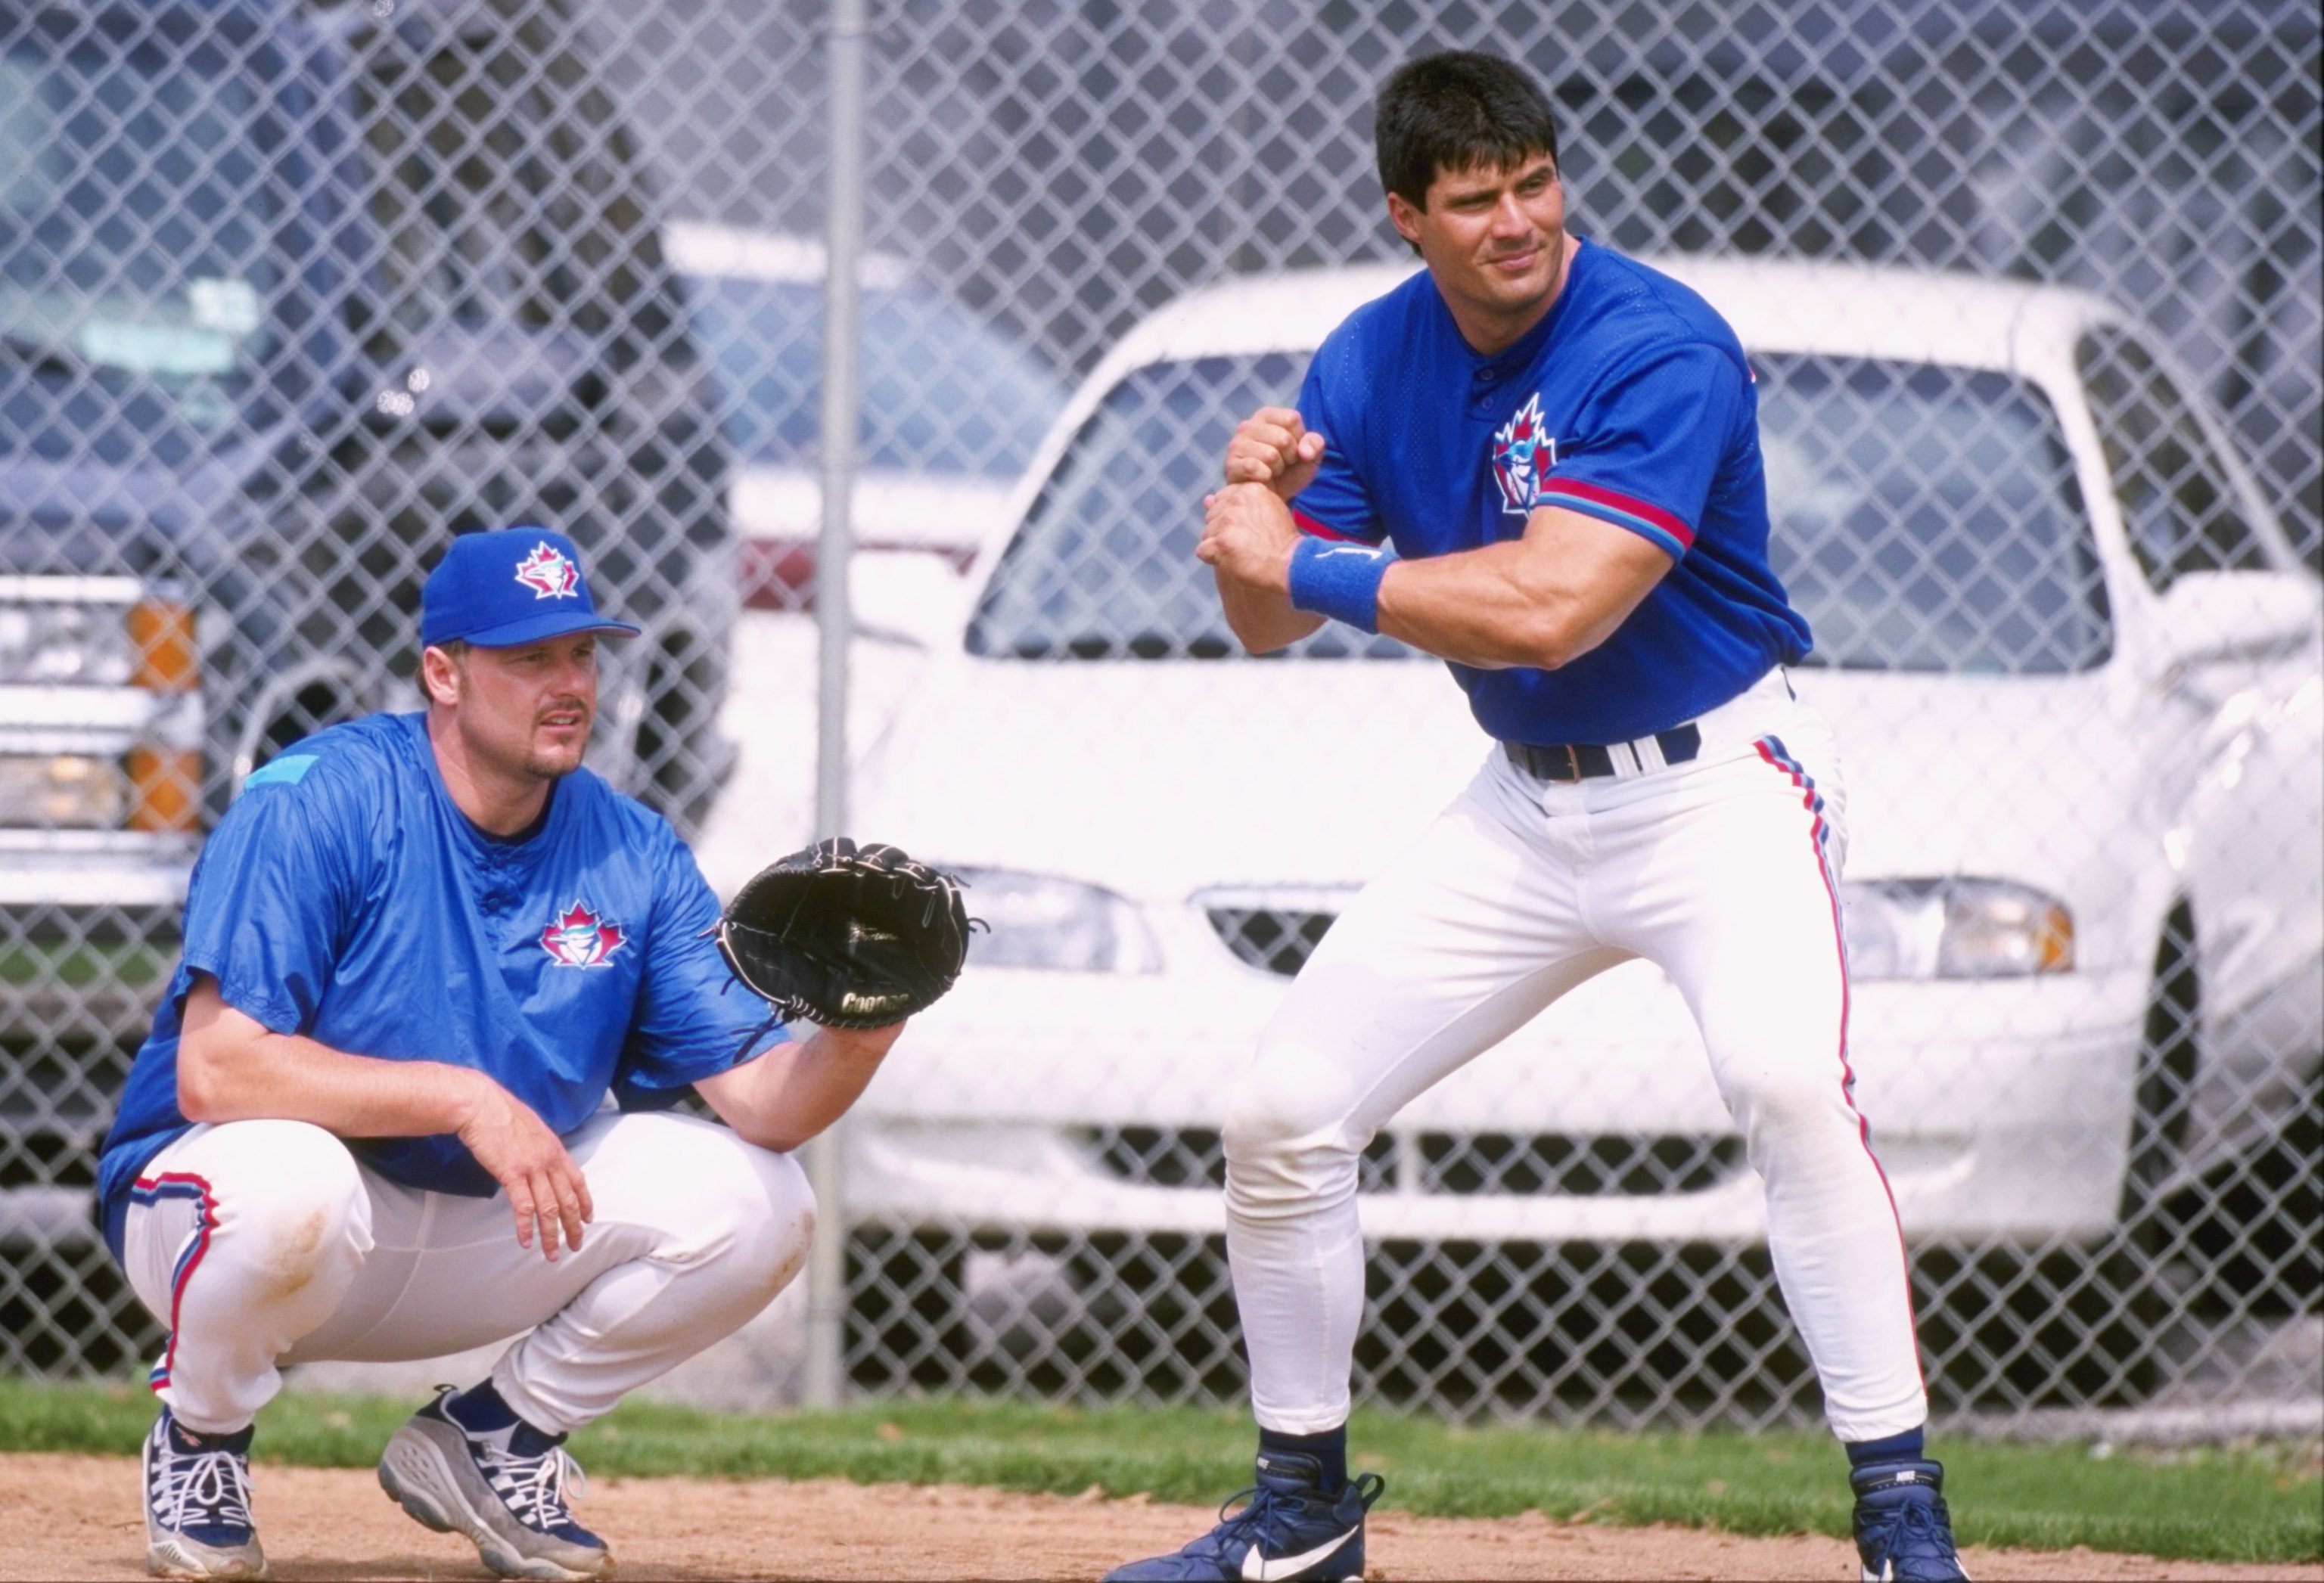 Jose Canseco, Barry Bonds and 5 Retired MLB Stars We Wish Would